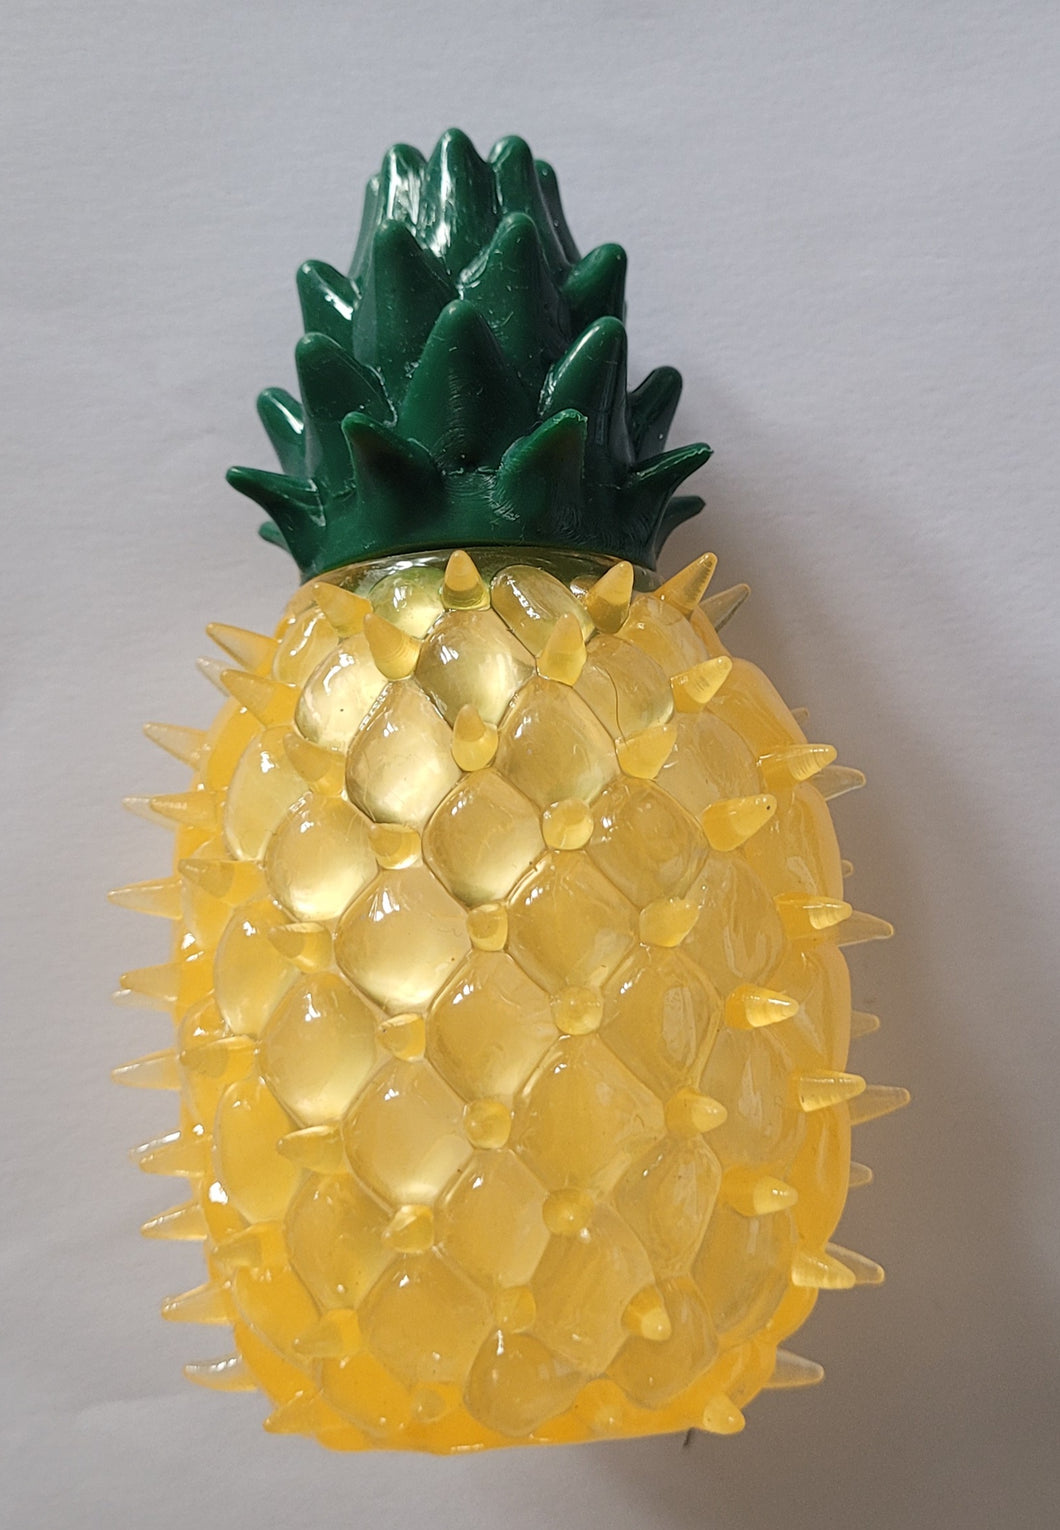 Pineapple freezable and reusable cooling fruit dog toy